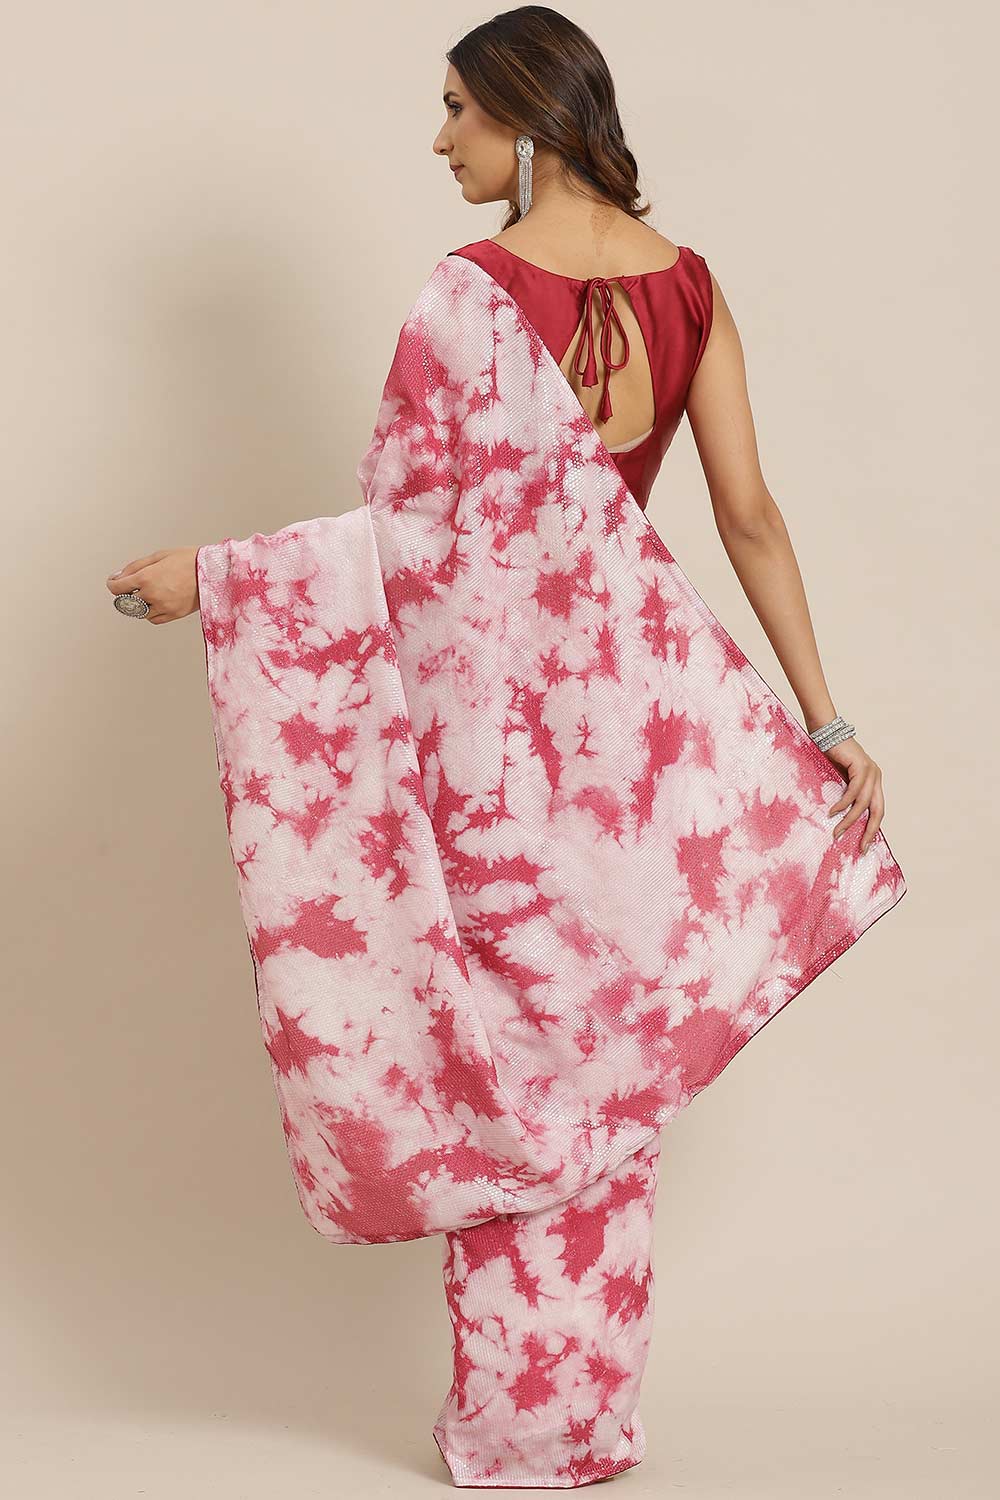 Shop Shona Pink Poly Silk Tie And Dye Embellished One Minute Saree at best offer at our  Store - One Minute Saree